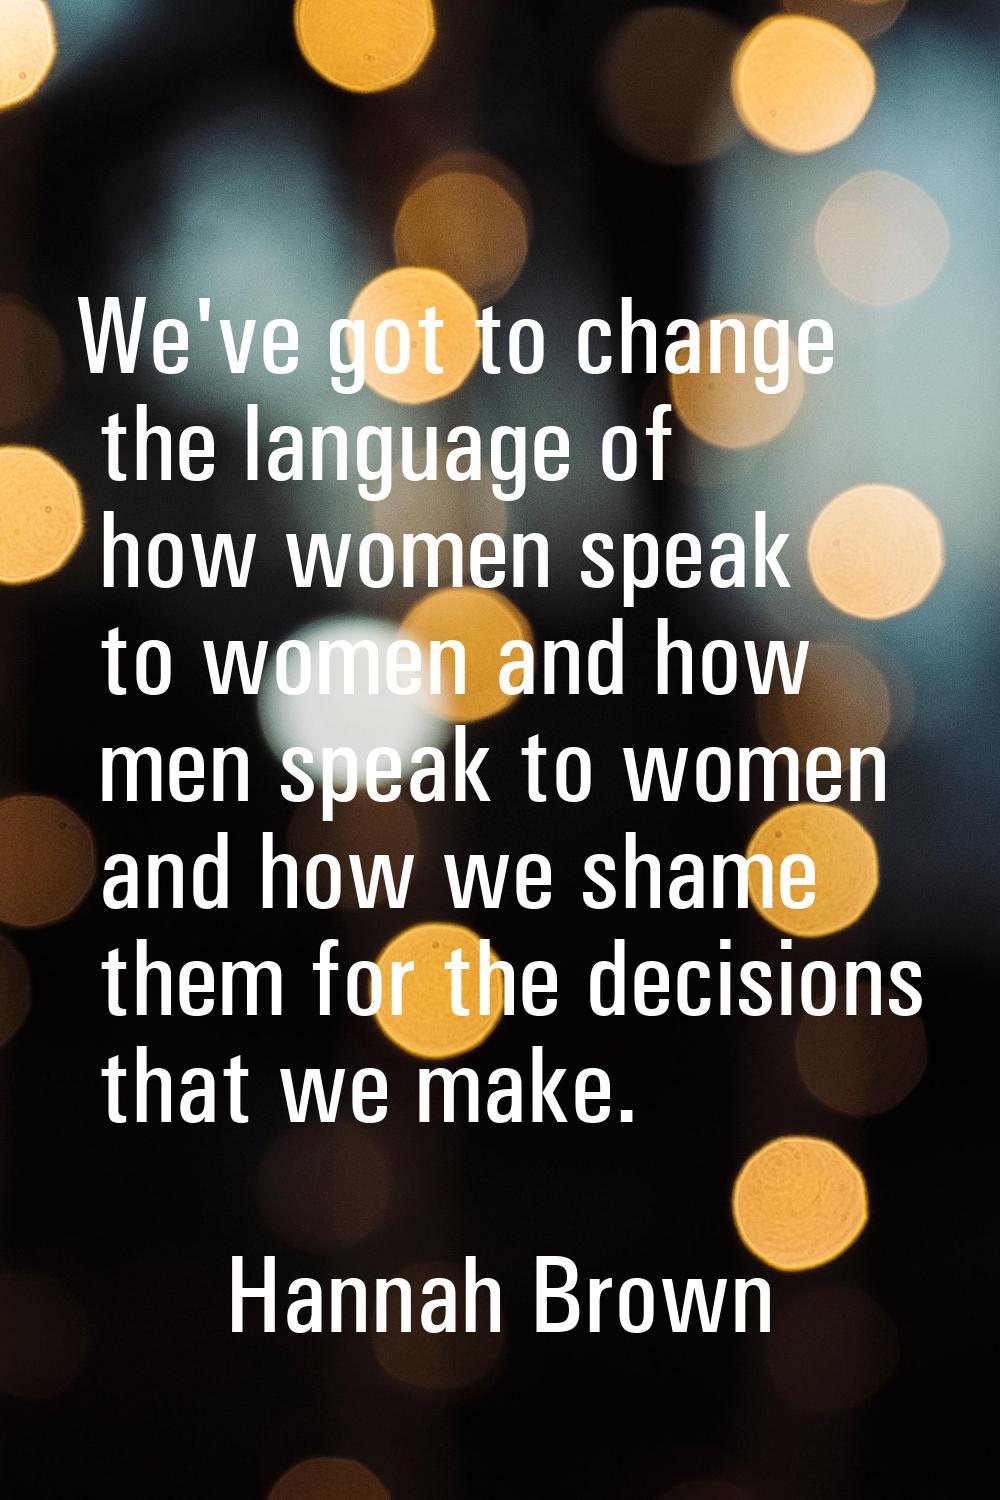 We've got to change the language of how women speak to women and how men speak to women and how we 